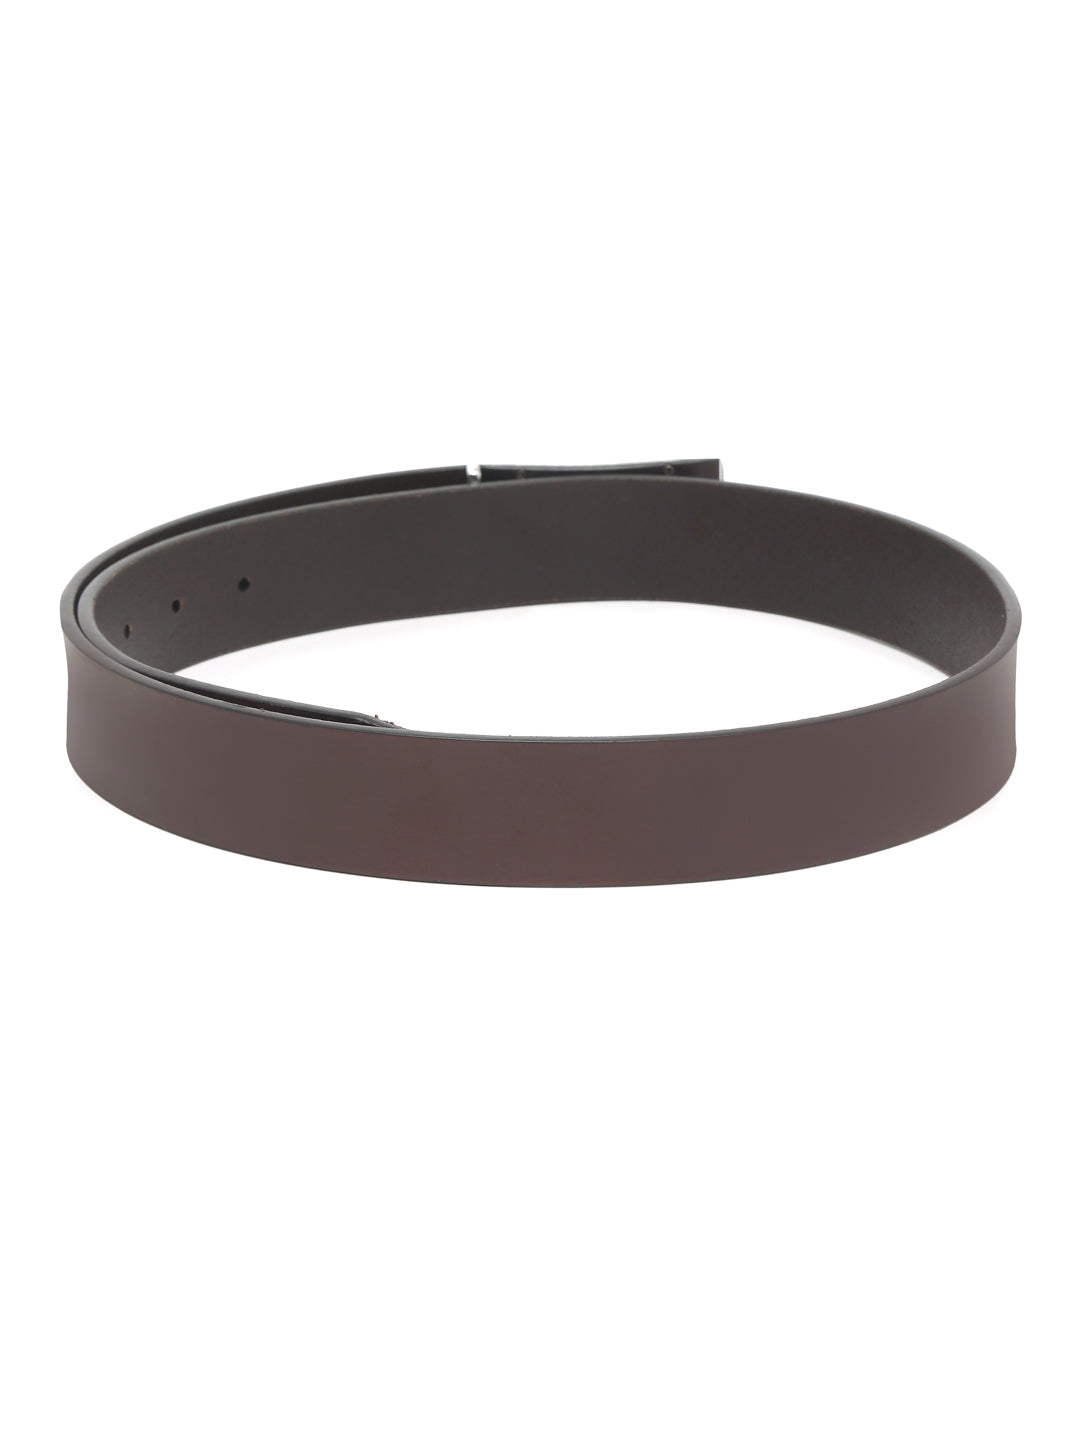 Buy CIMONI Classic Executive Men's Leather Belt  Semi Formal Pure Leather  Belt ( Color - Tan Brown, Waist Upto - 38, Genuine Leather Belt) Online at  Best Prices in India - JioMart.